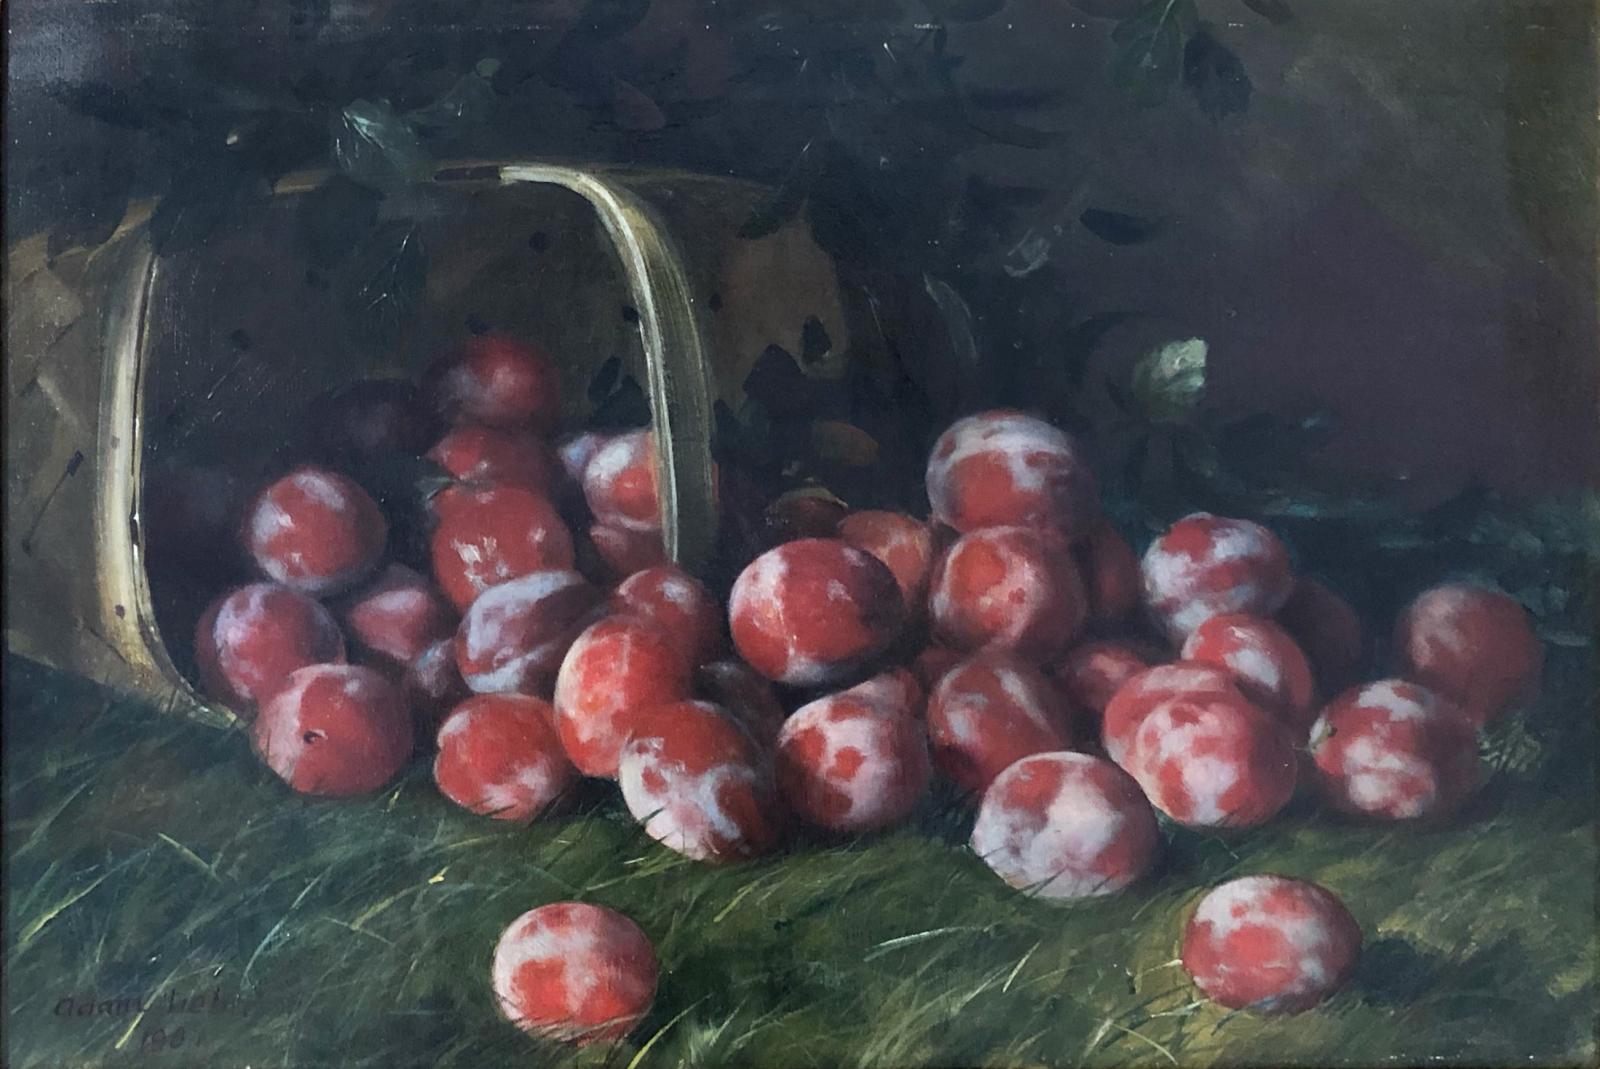 A painting of an upturned basket spilling prunes on to a lawn.